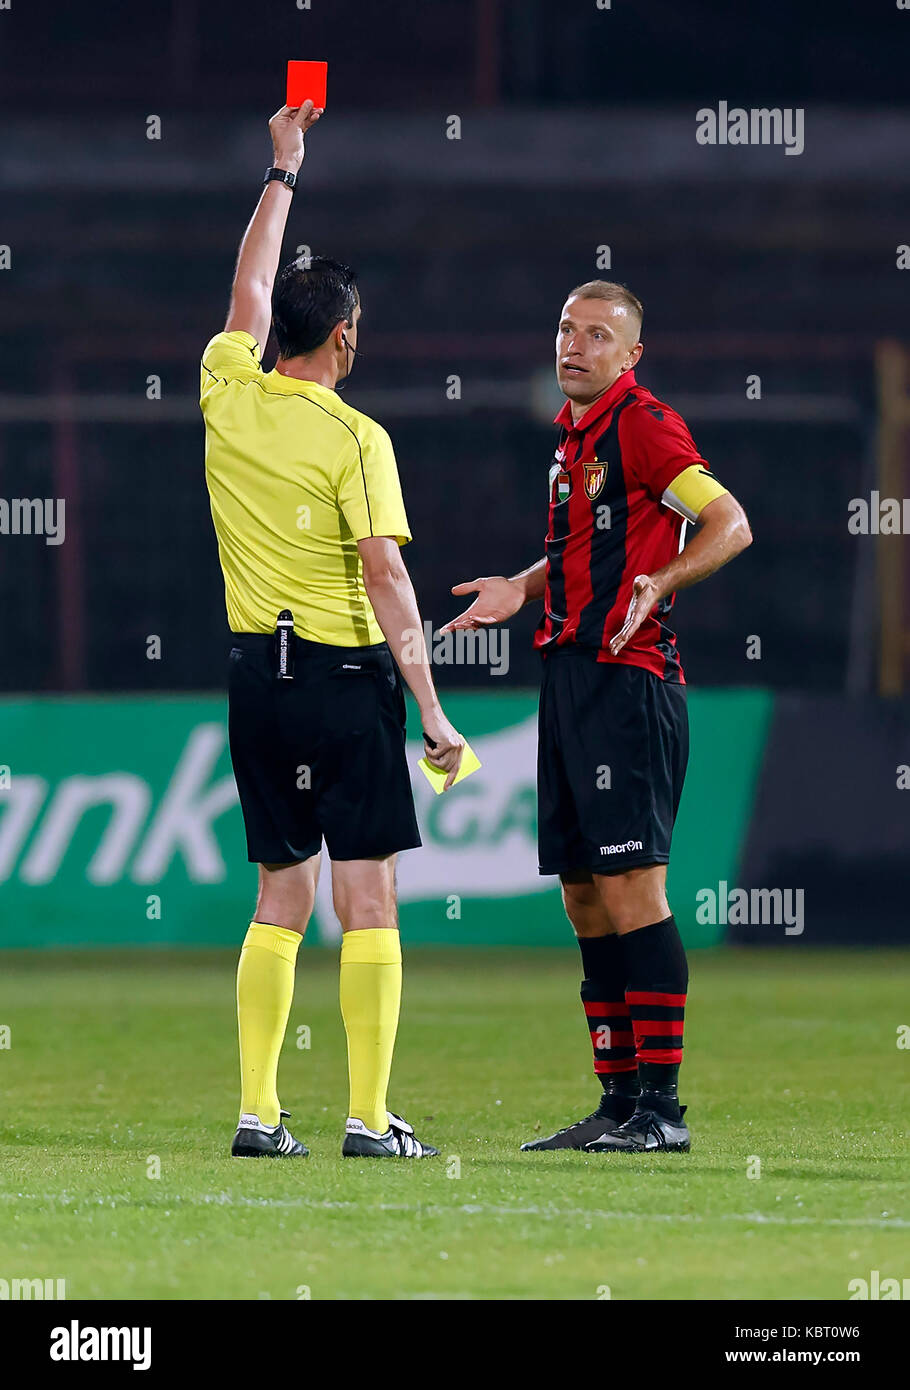 Budapest, Hungary. 30th Sep, 2017.  Referee Ciktor Kassai (L) shows the red card for Djordje Kamber (R) of Budapest Honved during the Hungarian OTP Bank Liga match between Budapest Honved and Vasas FC at Bozsik Stadium on September 30, 2017 in Budapest, Hungary. Credit: Laszlo Szirtesi/Alamy Live News Stock Photo